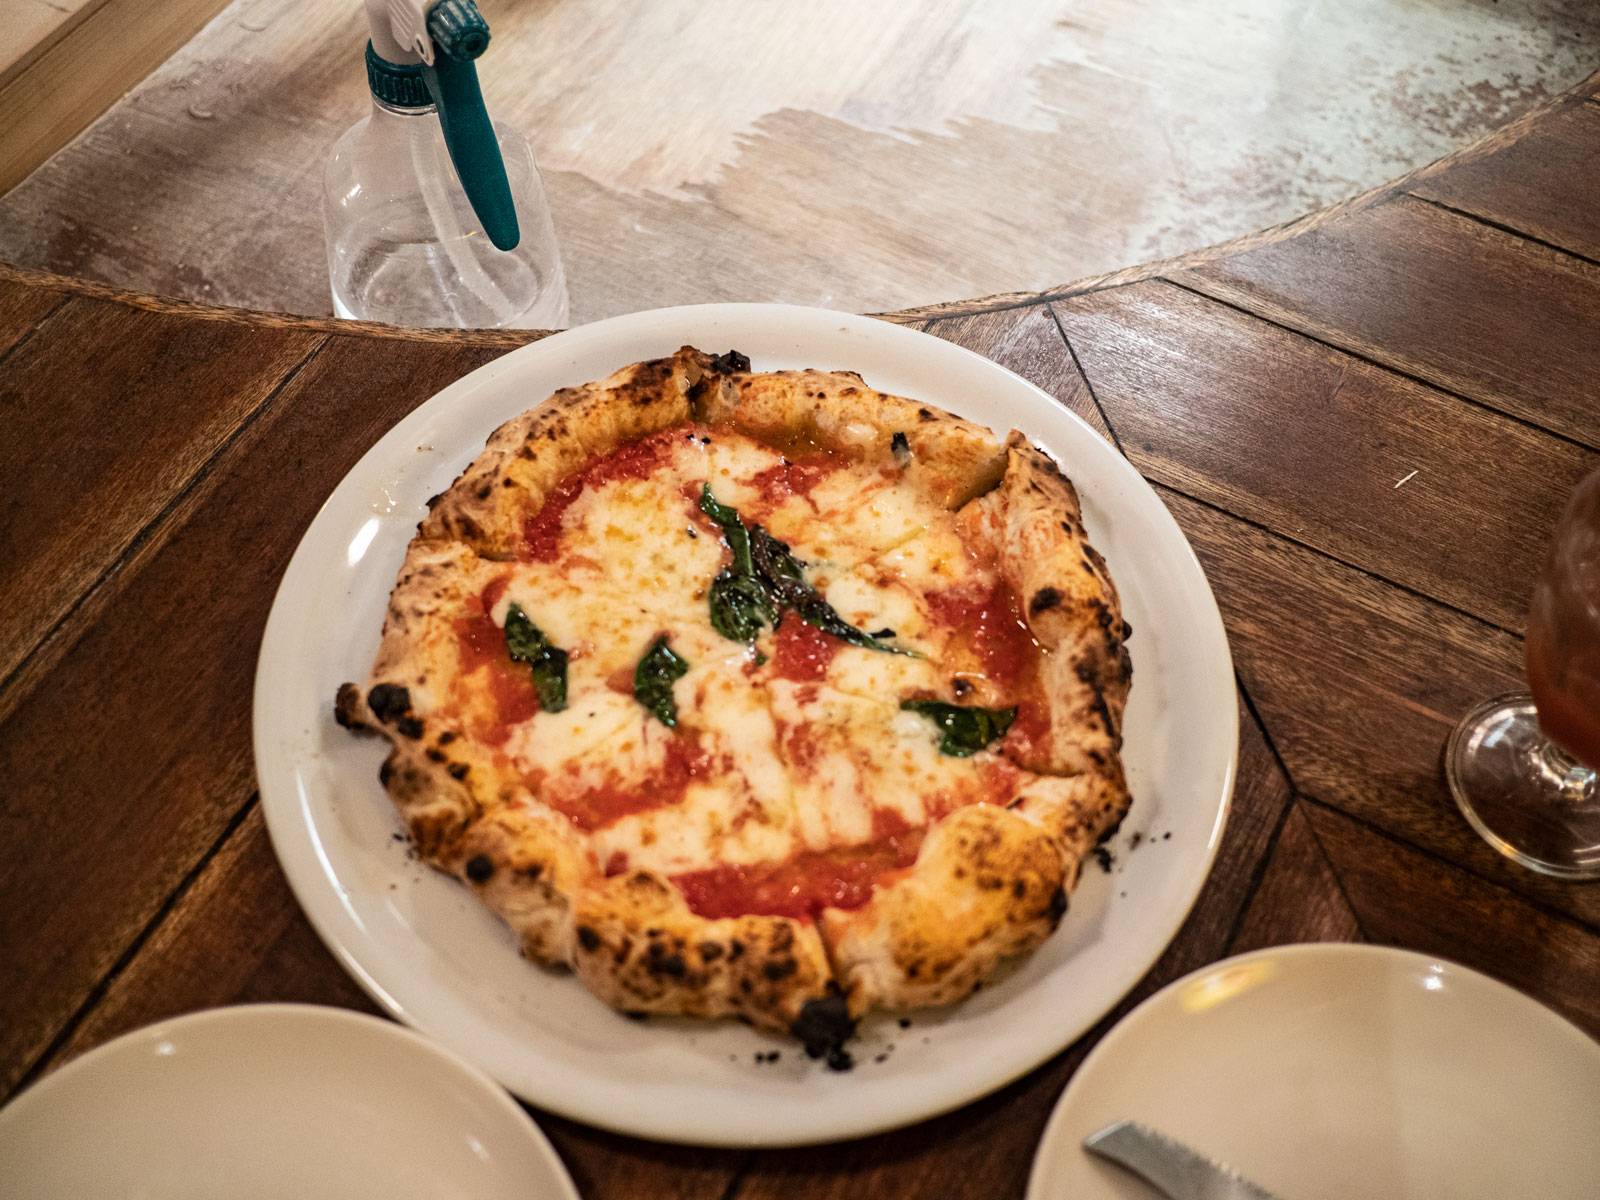 One seriously good looking Margherita Pizza